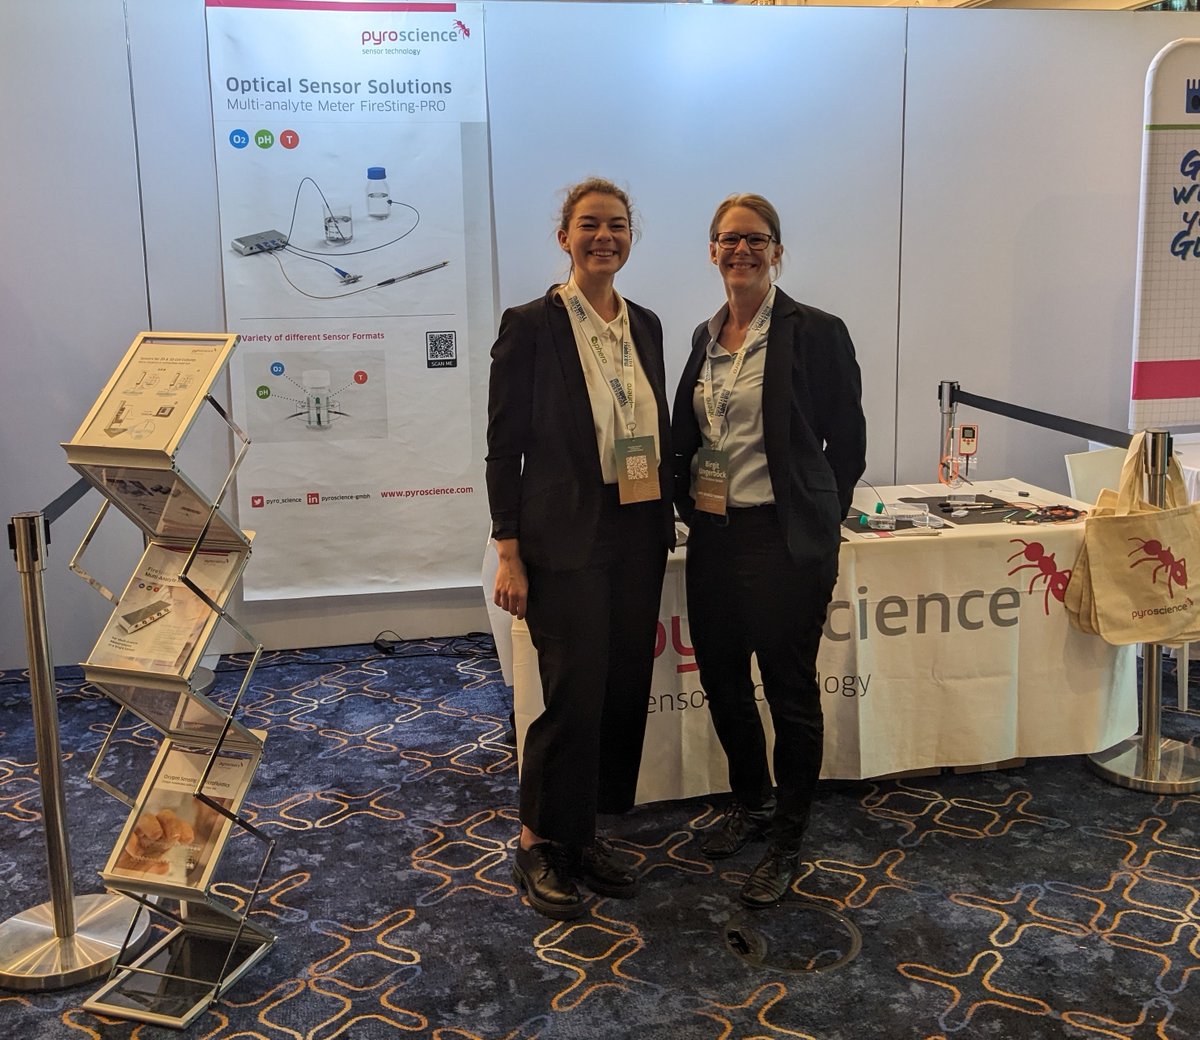 👉Last exhibition day on the 2nd #MPSWorldSummit2023 in Berlin. Thanks for all the interest in our products and so many visitors at our stand 33 ! 👋
#oxygensensing #pHsensing #organonchip #cellculture #3DCellCulture #organoids #EUROoCS